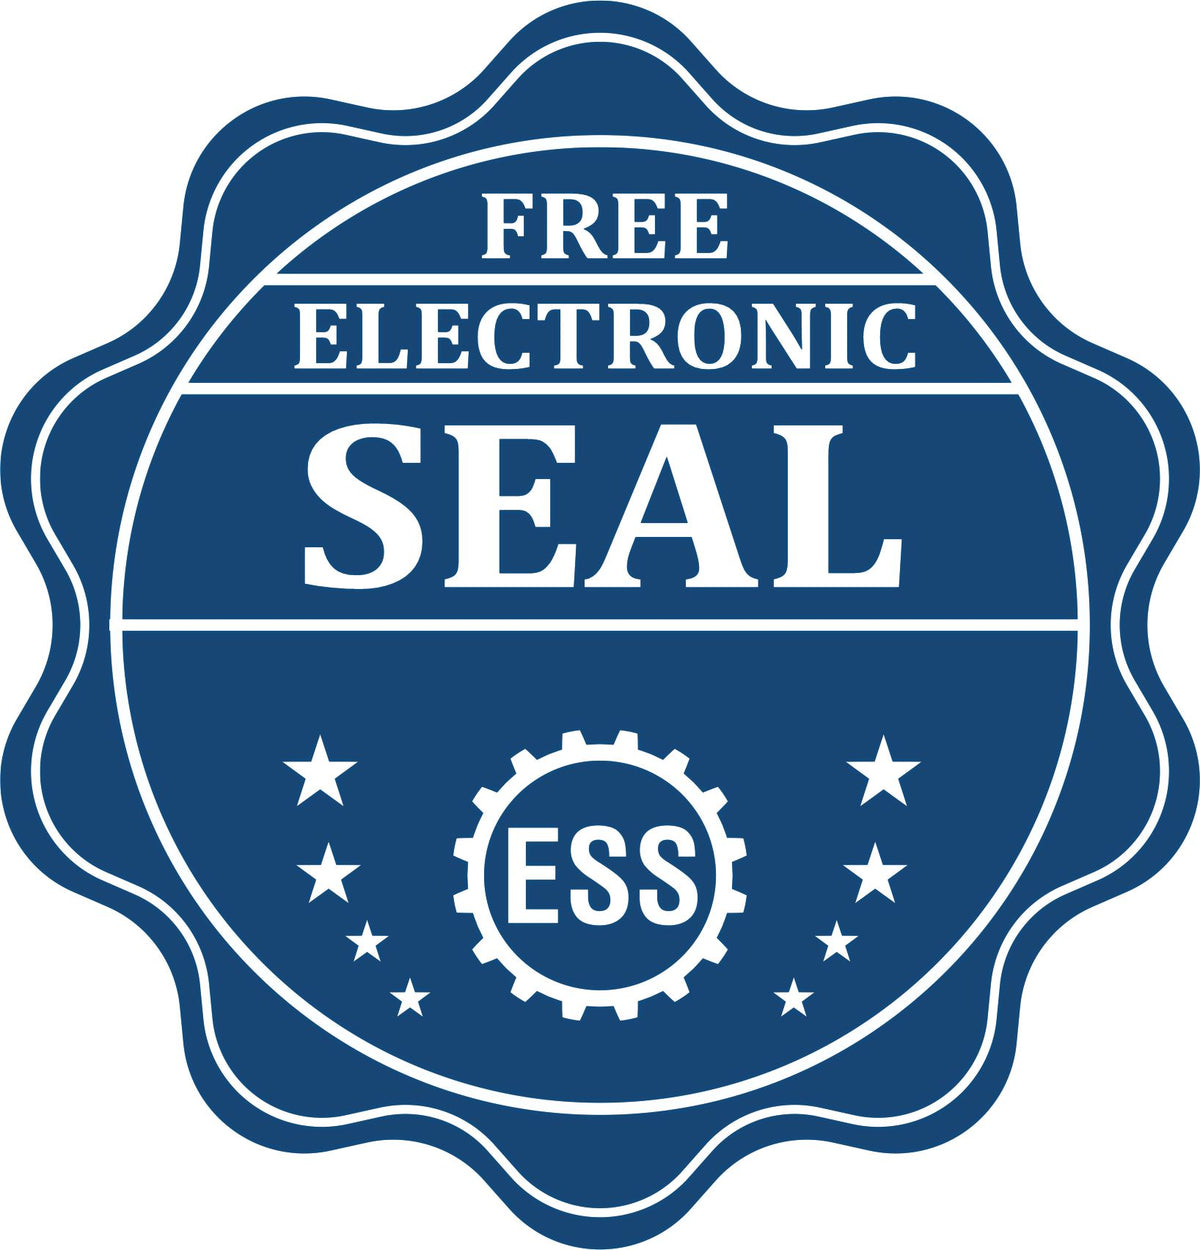 A badge showing a free electronic seal for the Hybrid Florida Engineer Seal with stars and the ESS gear on the emblem.